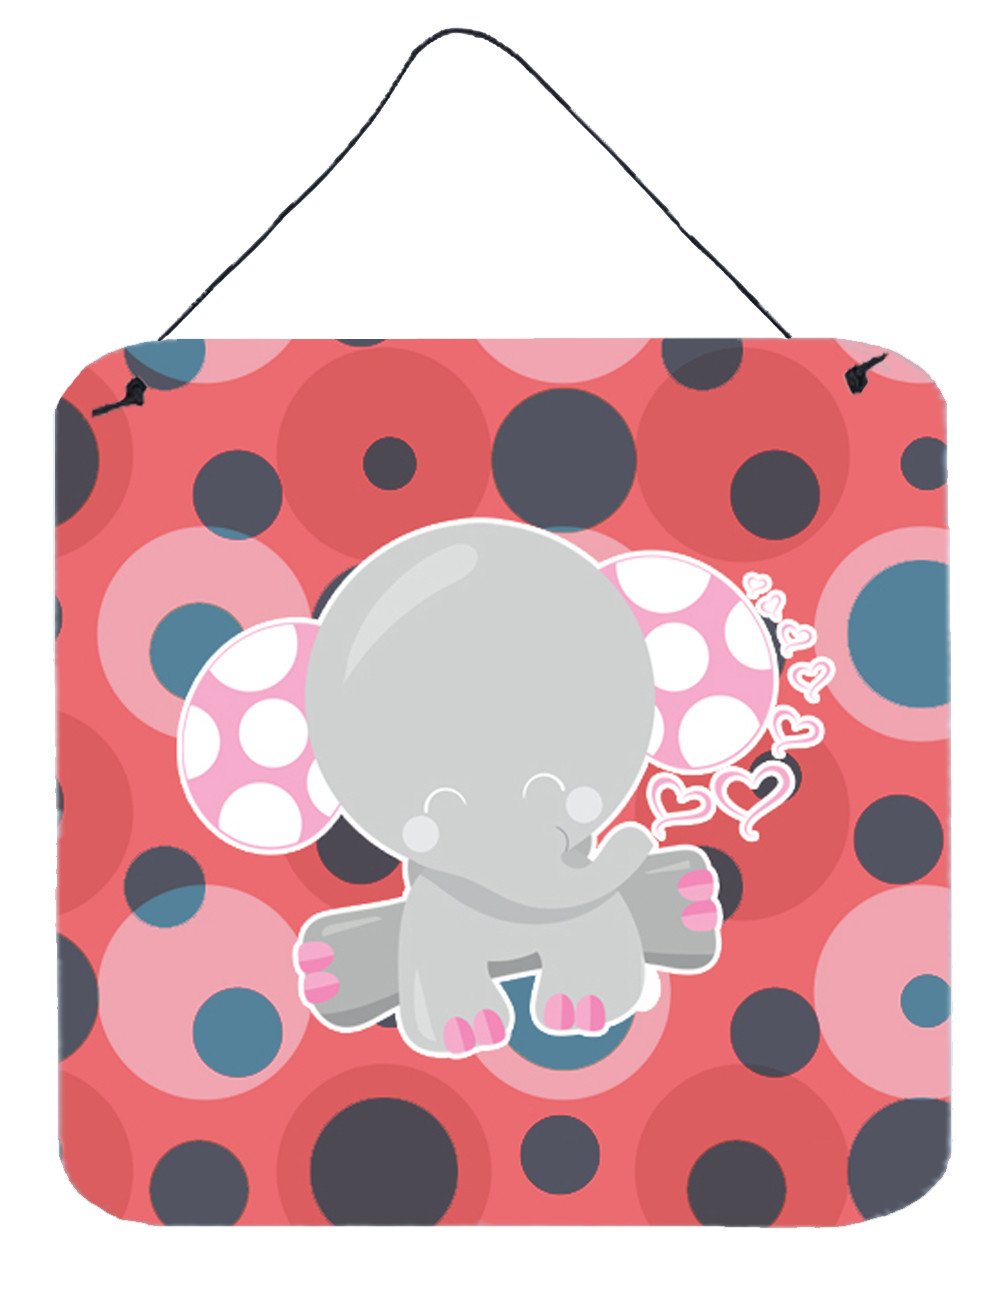 Elephant Lots of Polkadots Wall or Door Hanging Prints BB6951DS66 by Caroline's Treasures